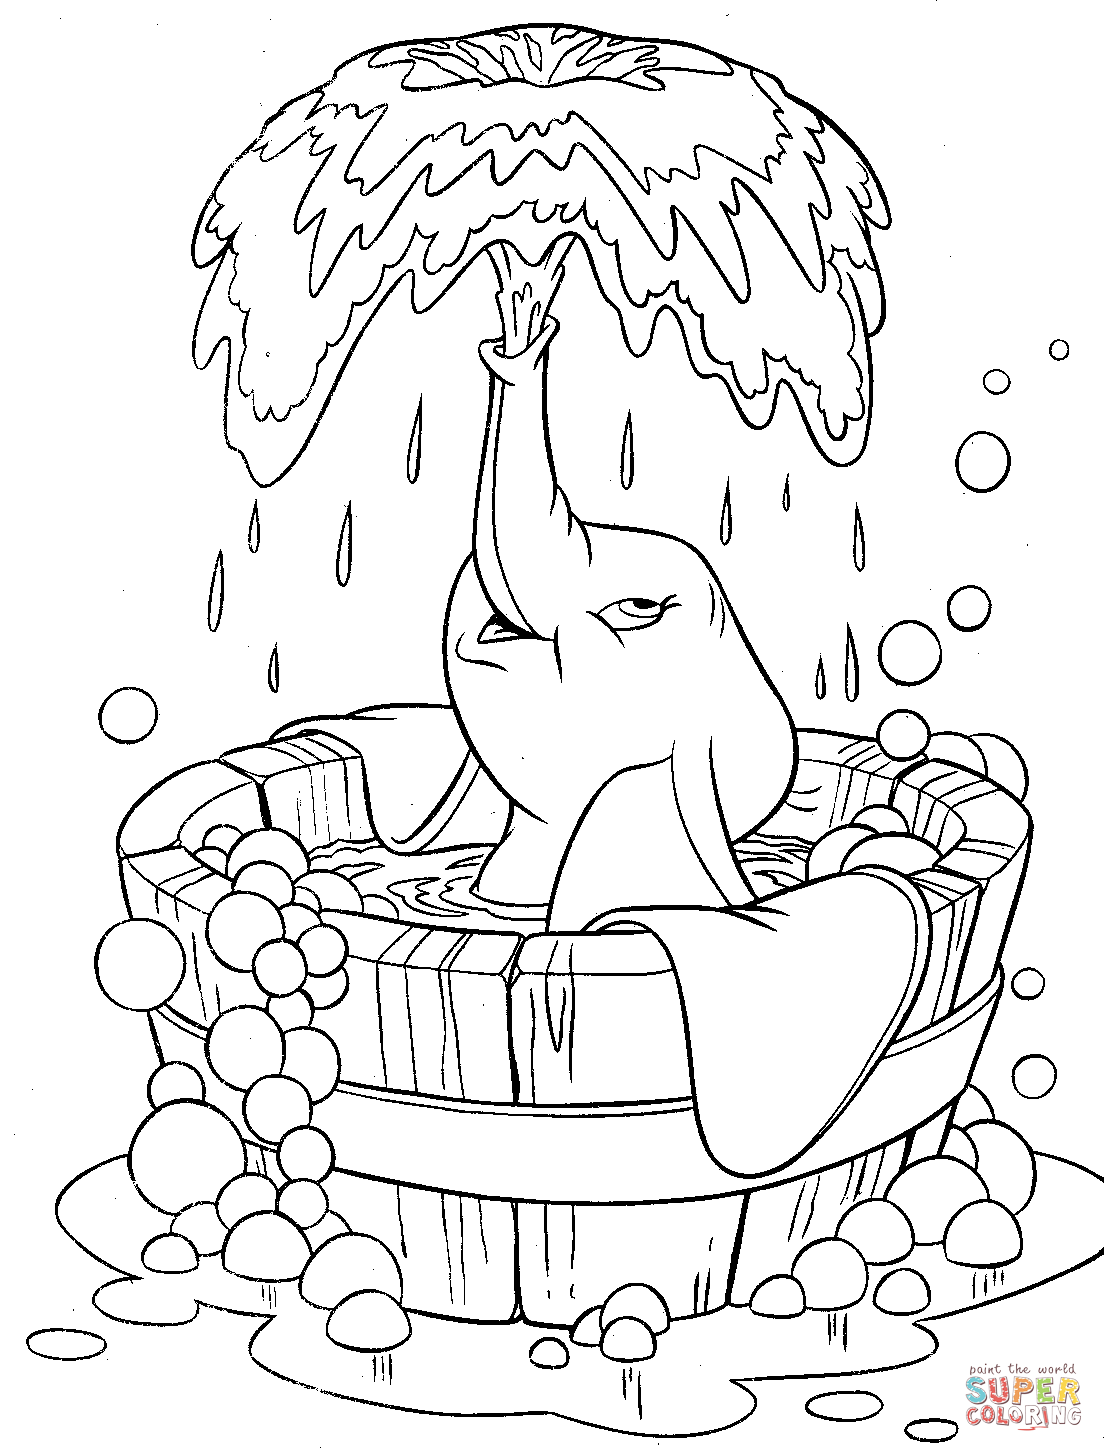 Fountain coloring #6, Download drawings